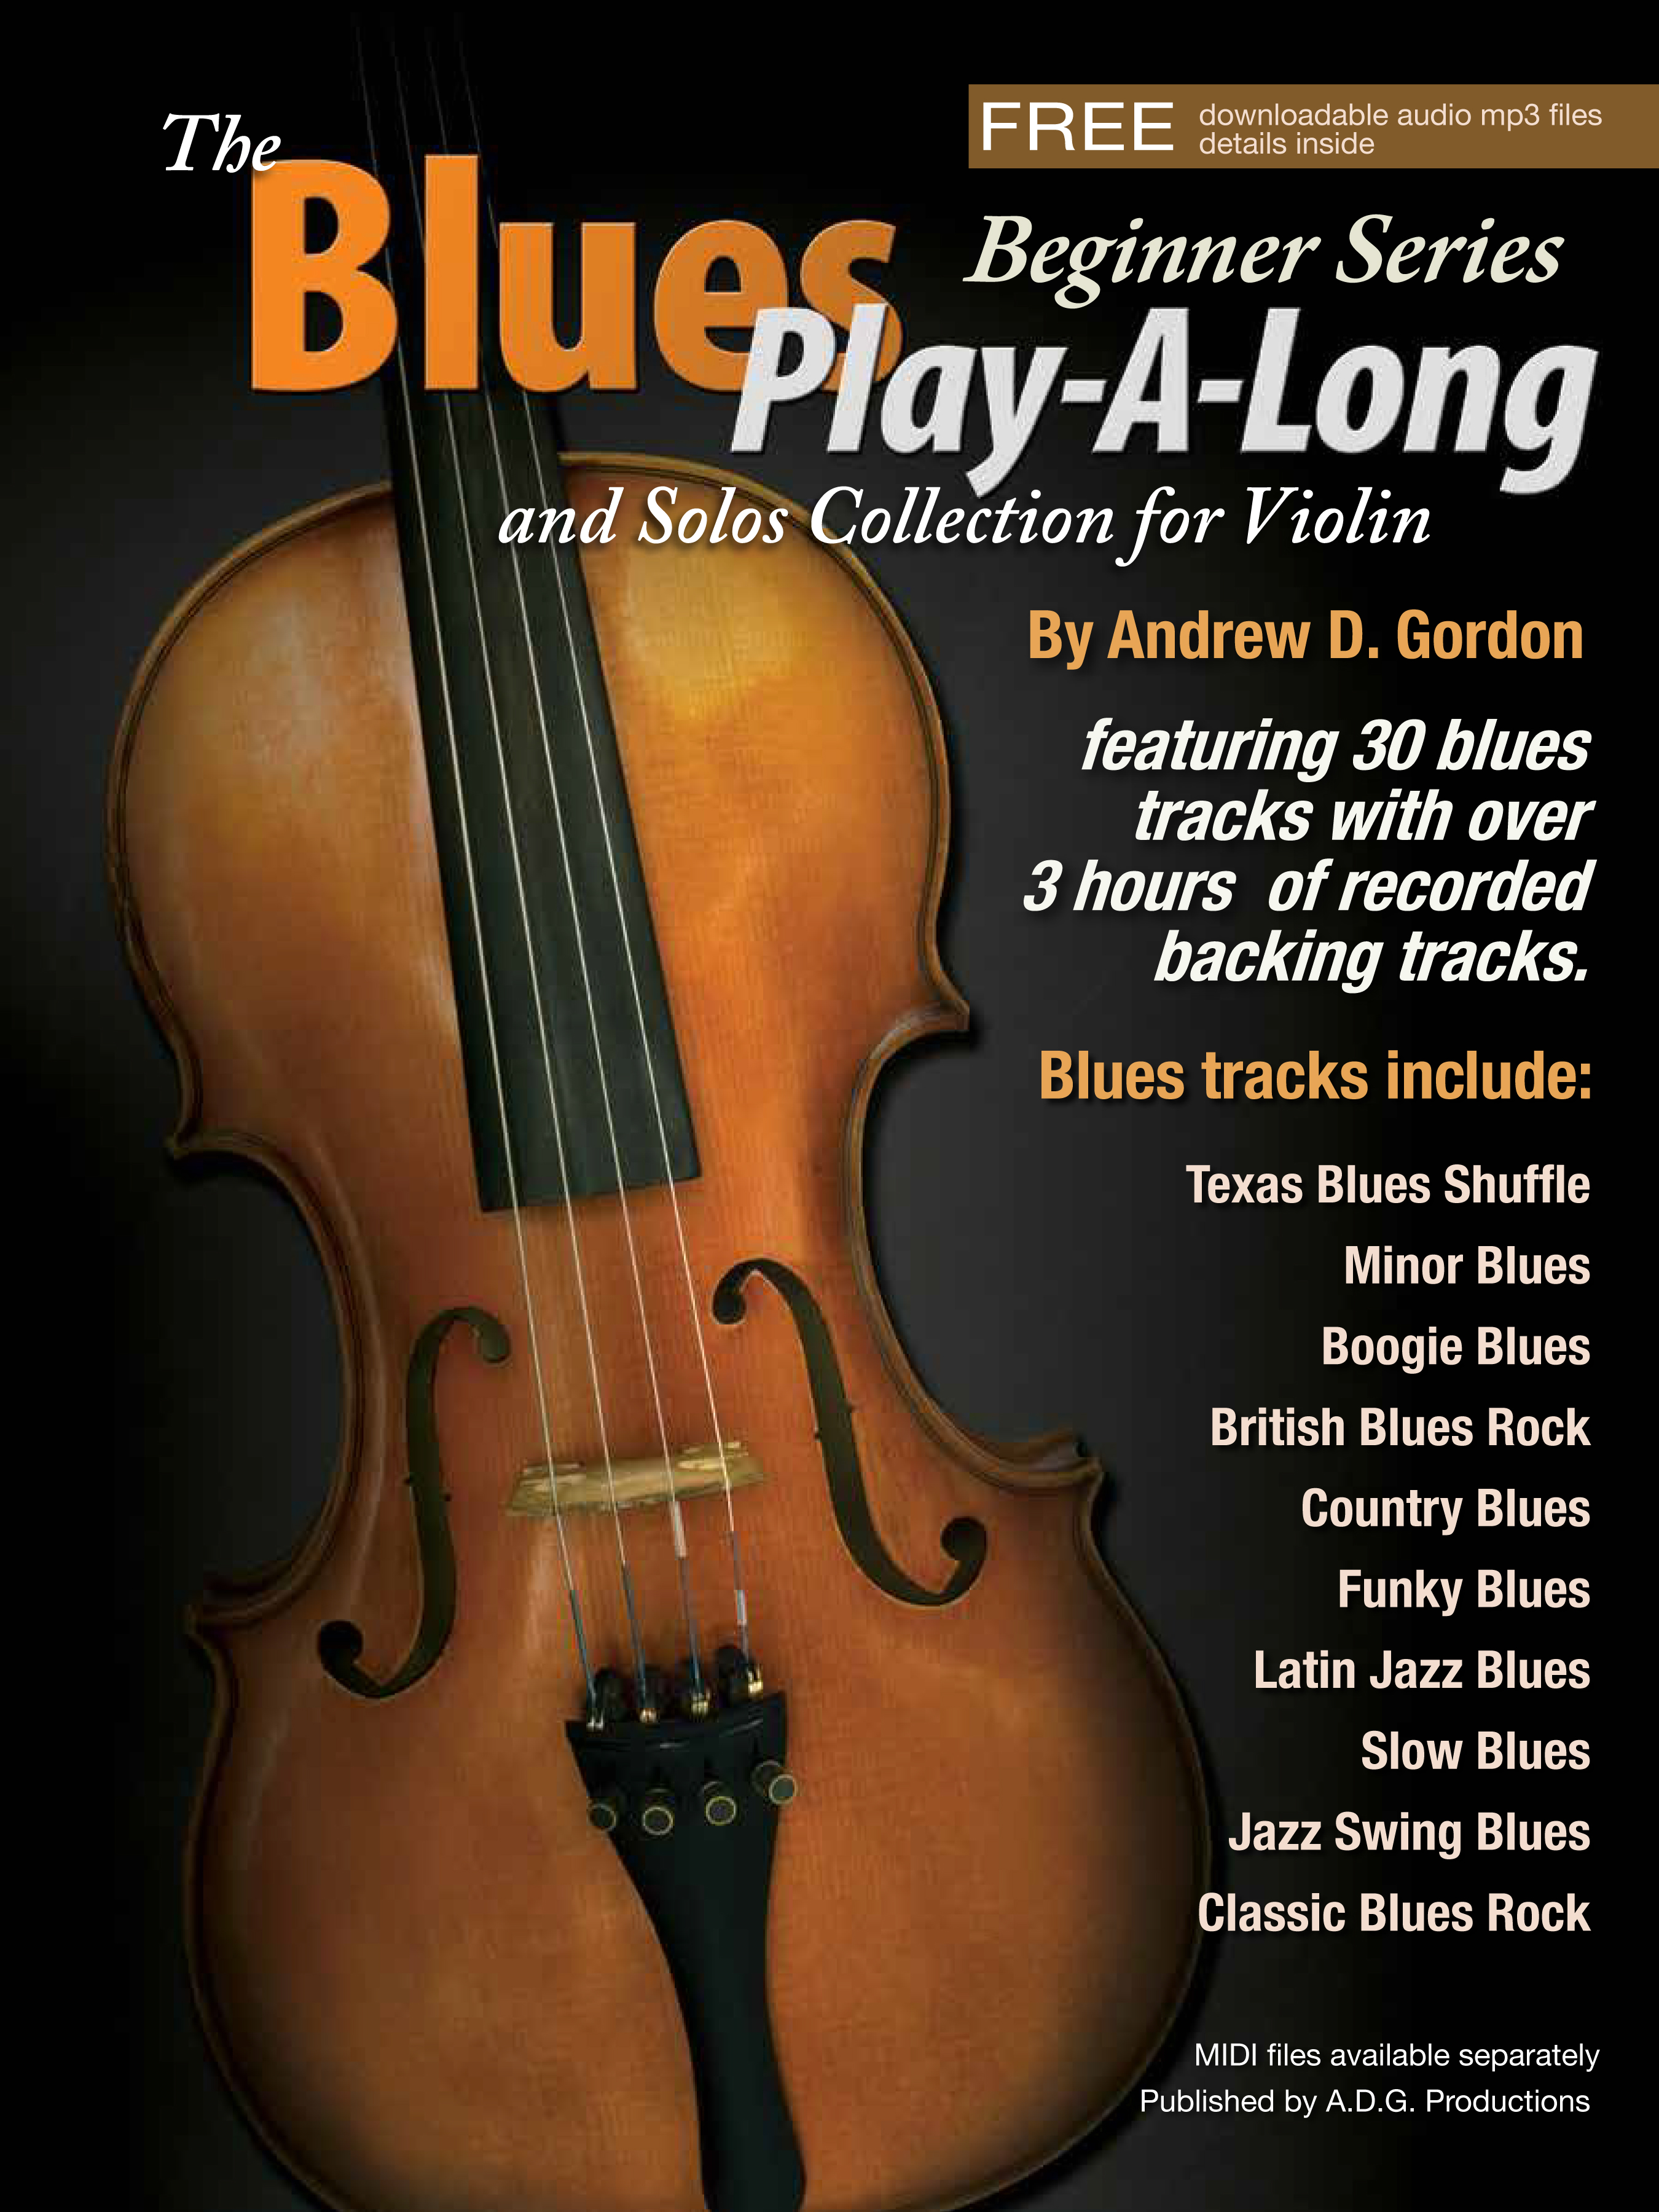 The Blues Play-A-Long And Solos